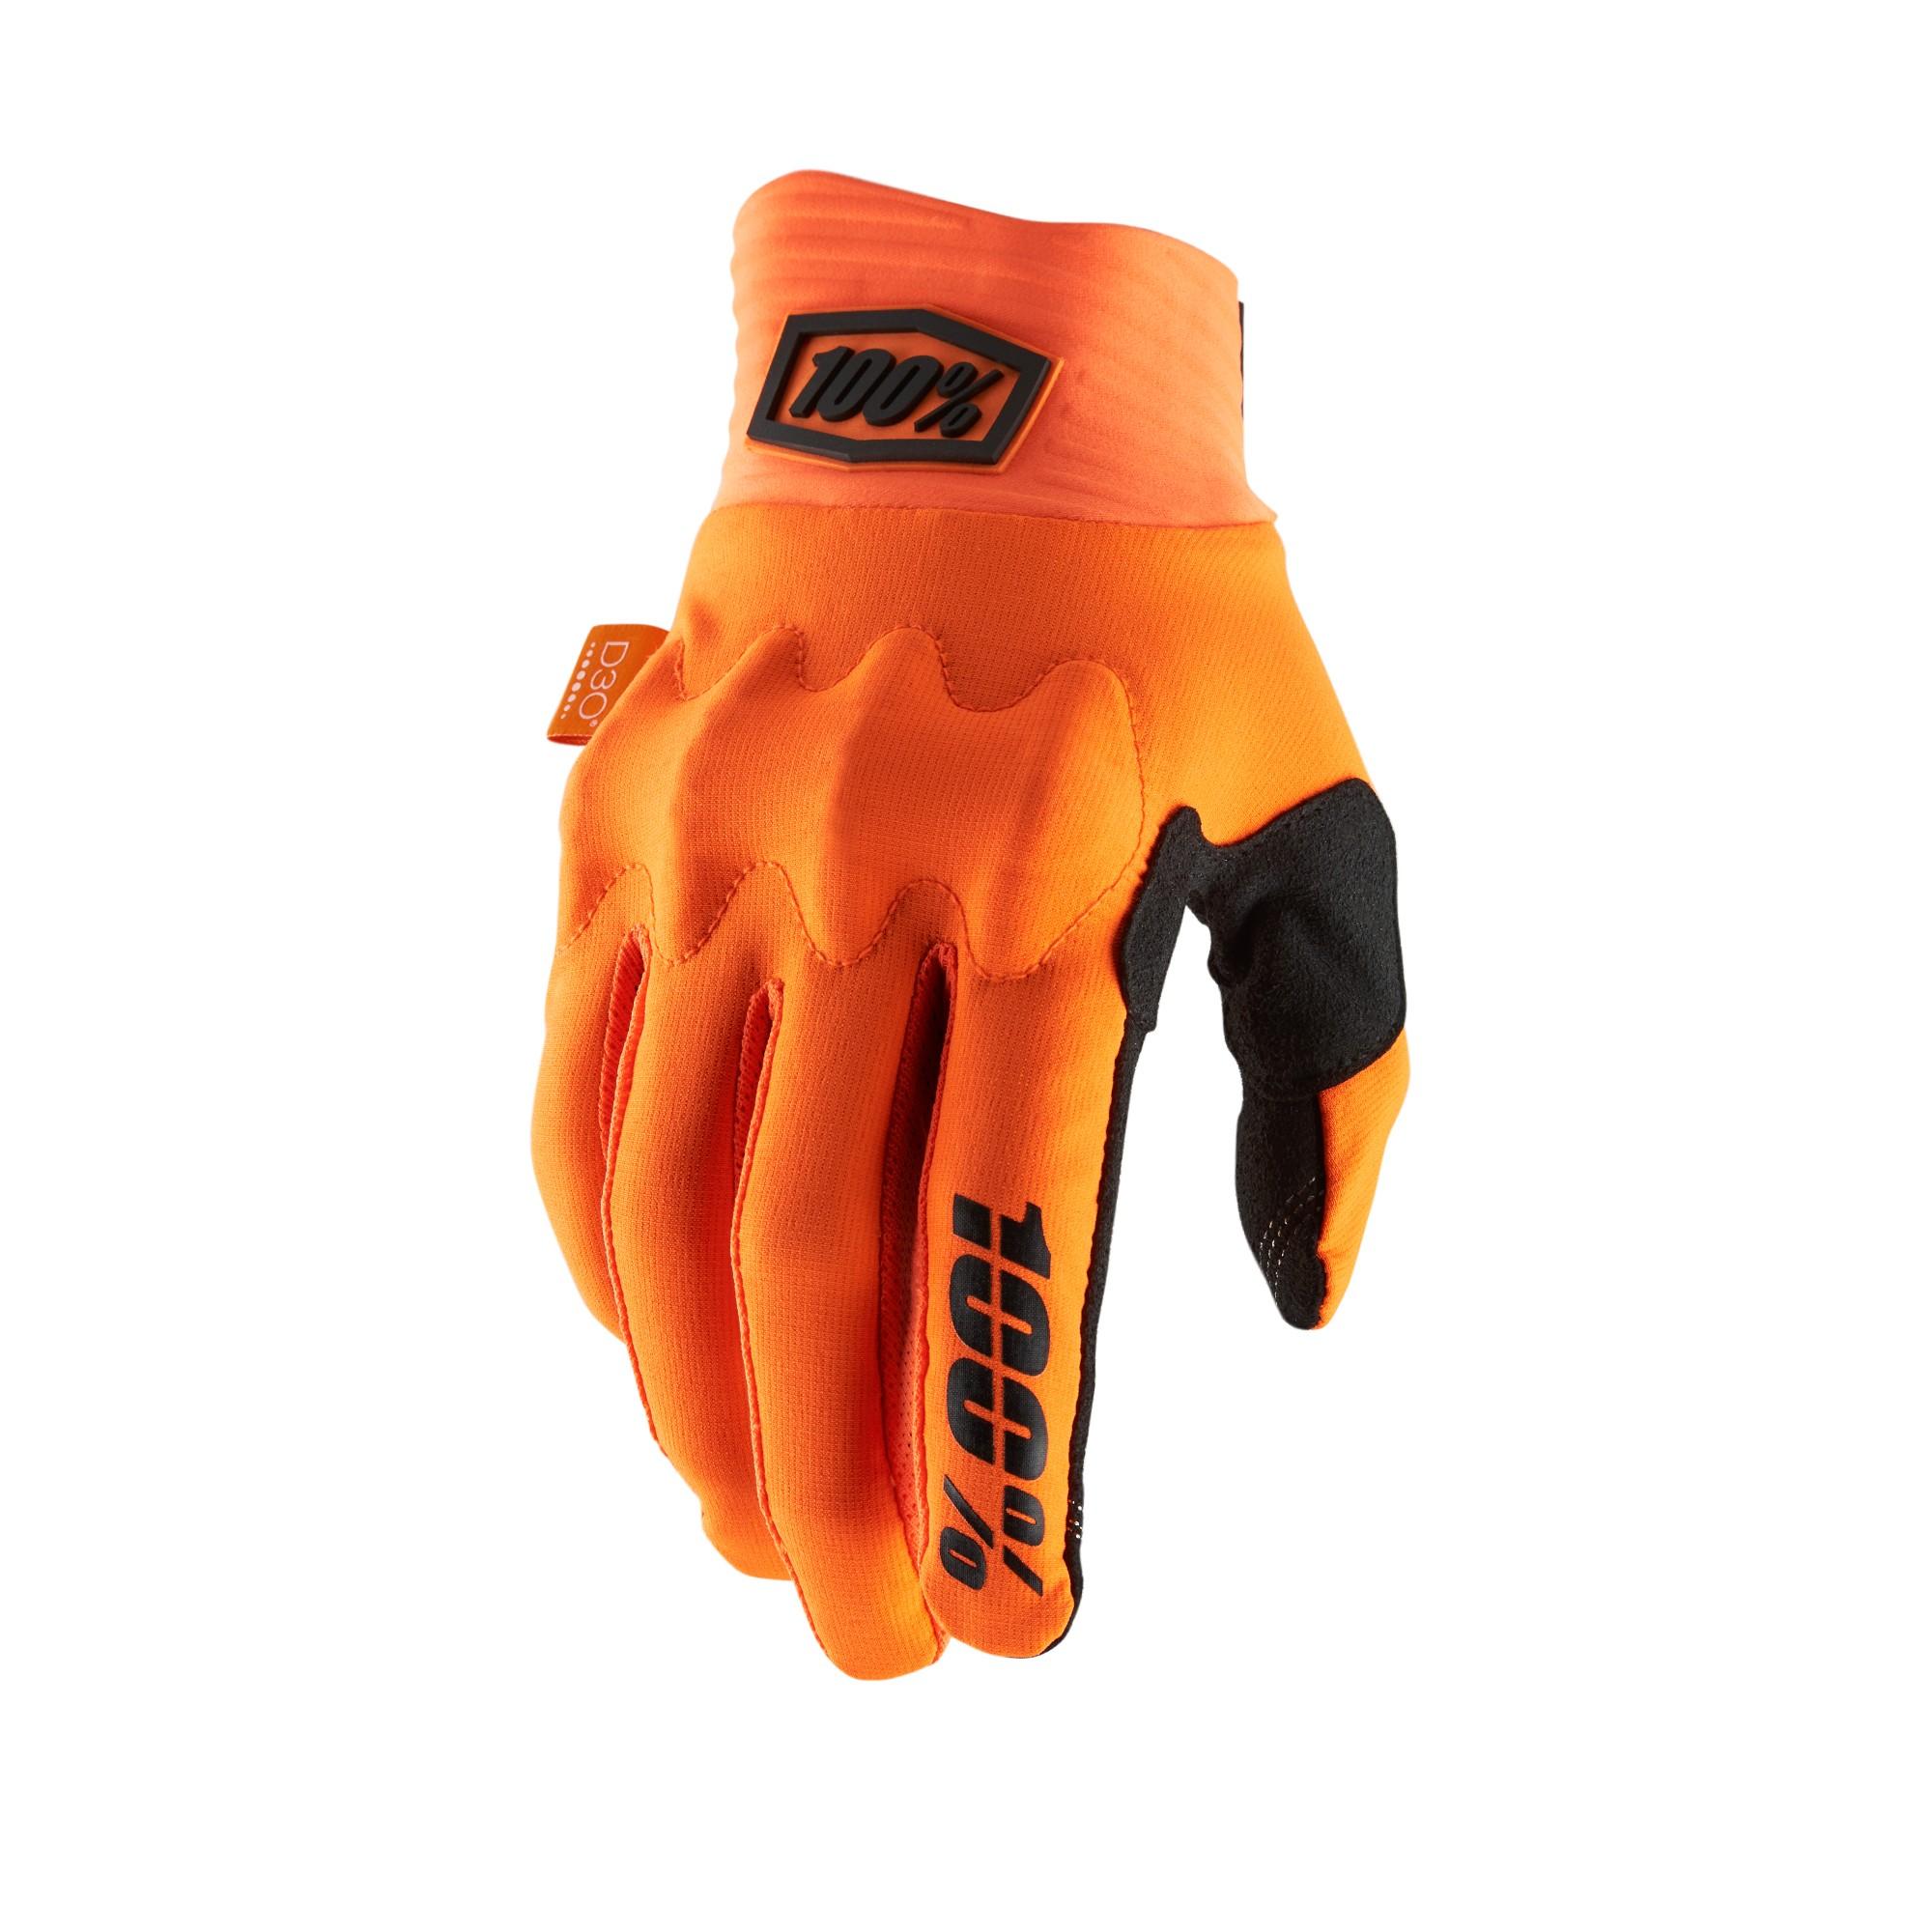 100% Cognito D30 Gloves